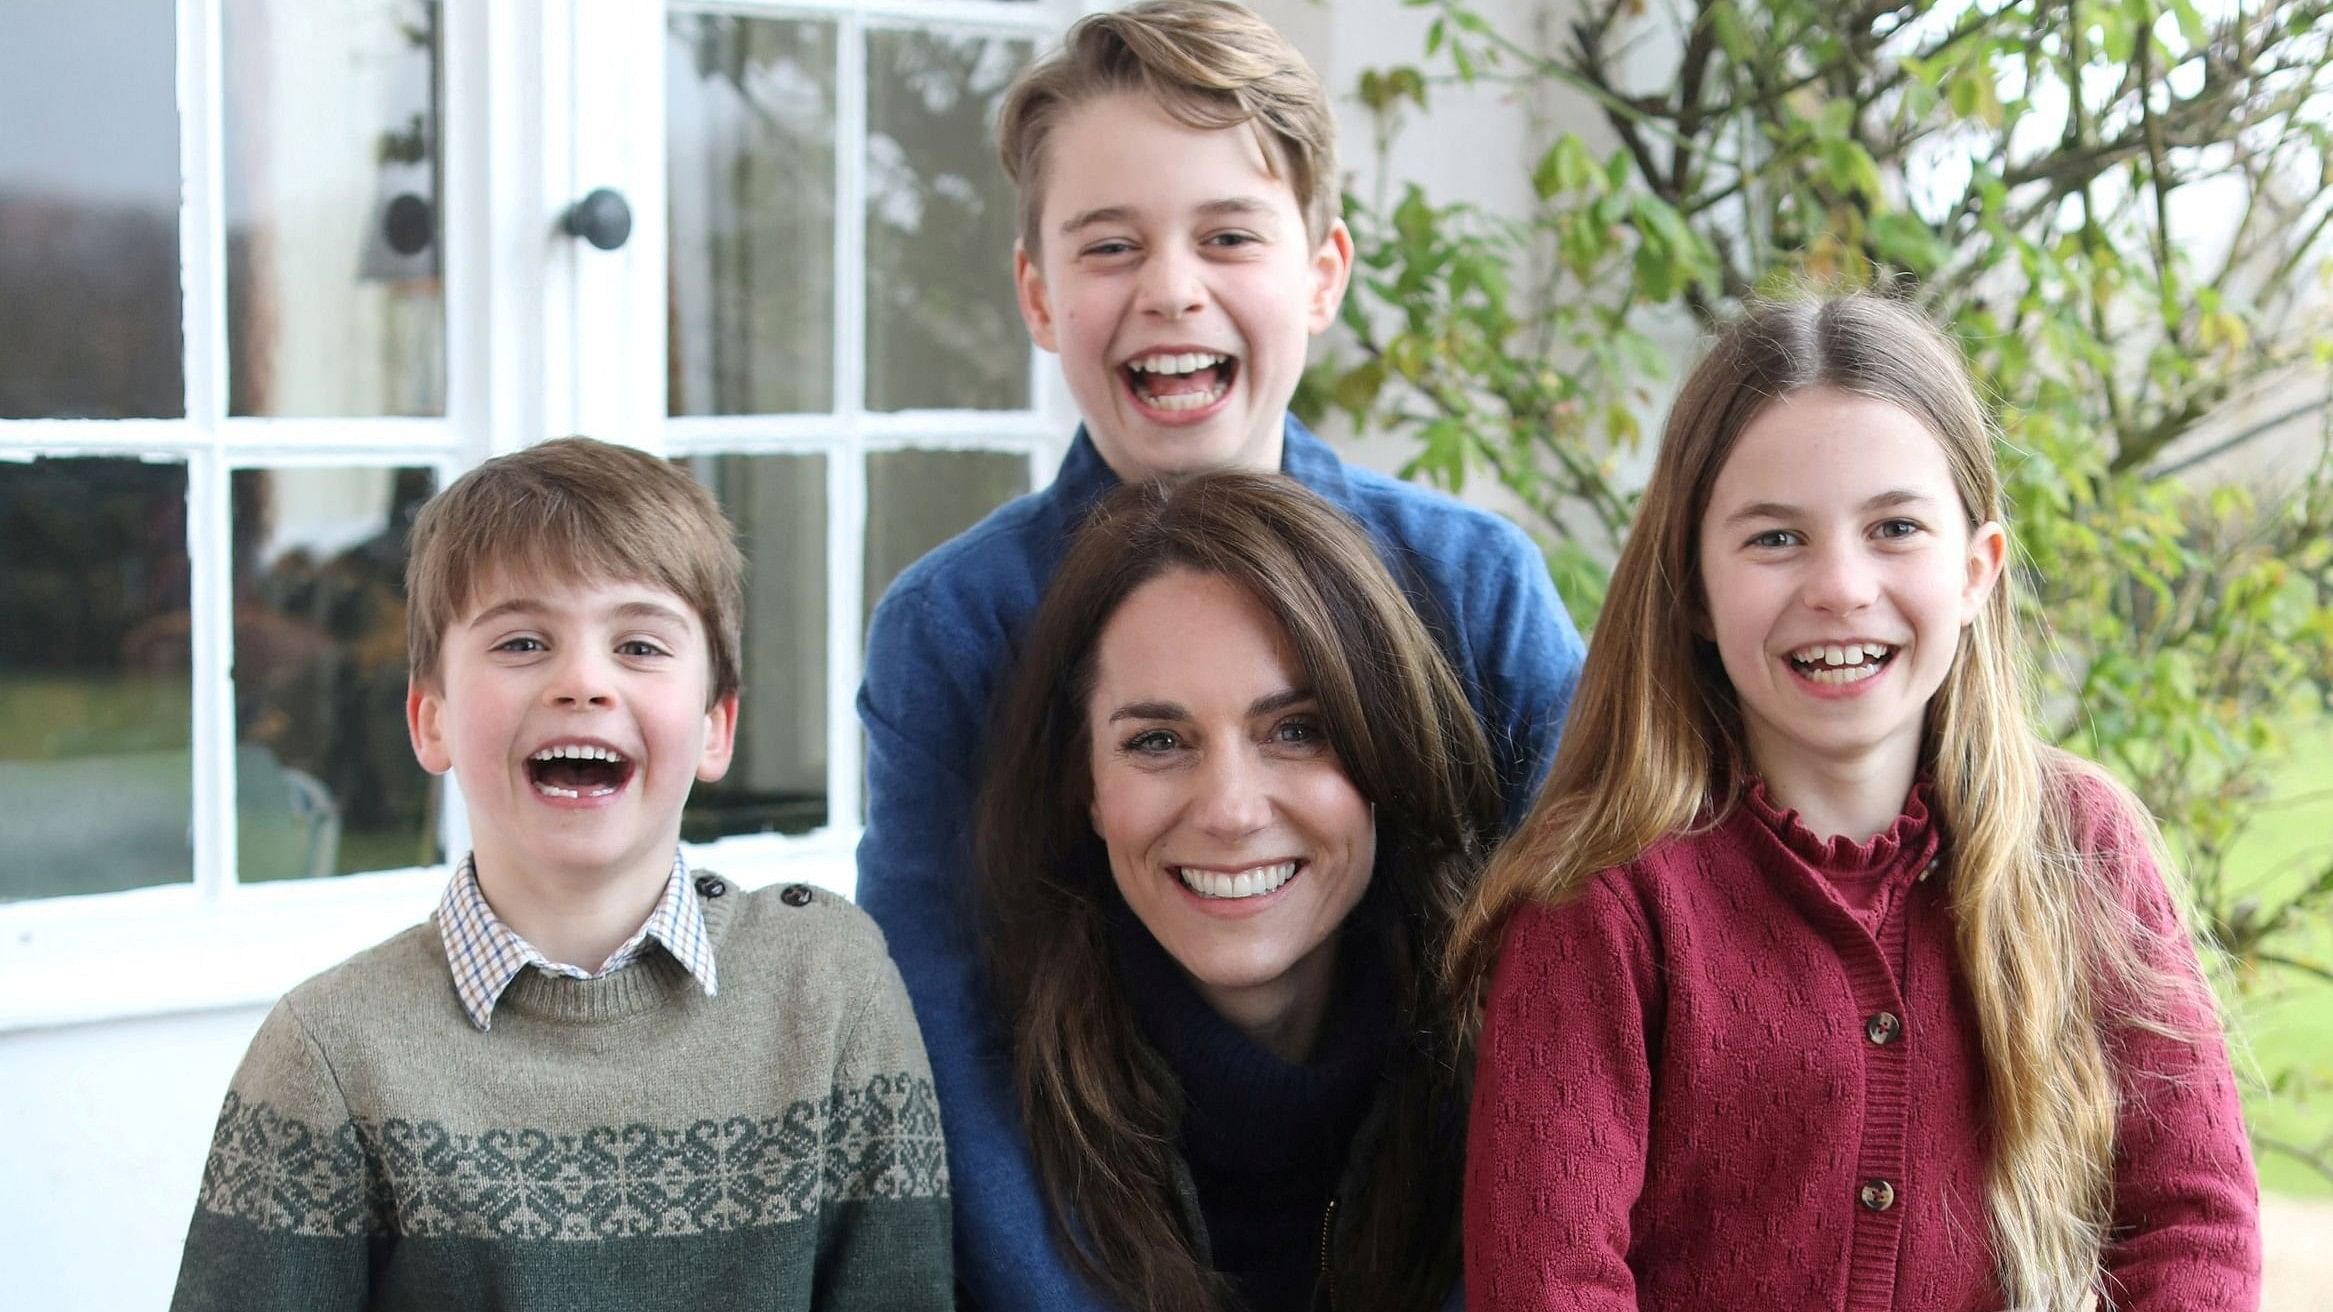 <div class="paragraphs"><p>The image posted by Kensington Palace showing Kate Middleton with children. Media houses and netizens have alleged that the image has been digitally "manipulated".</p></div>